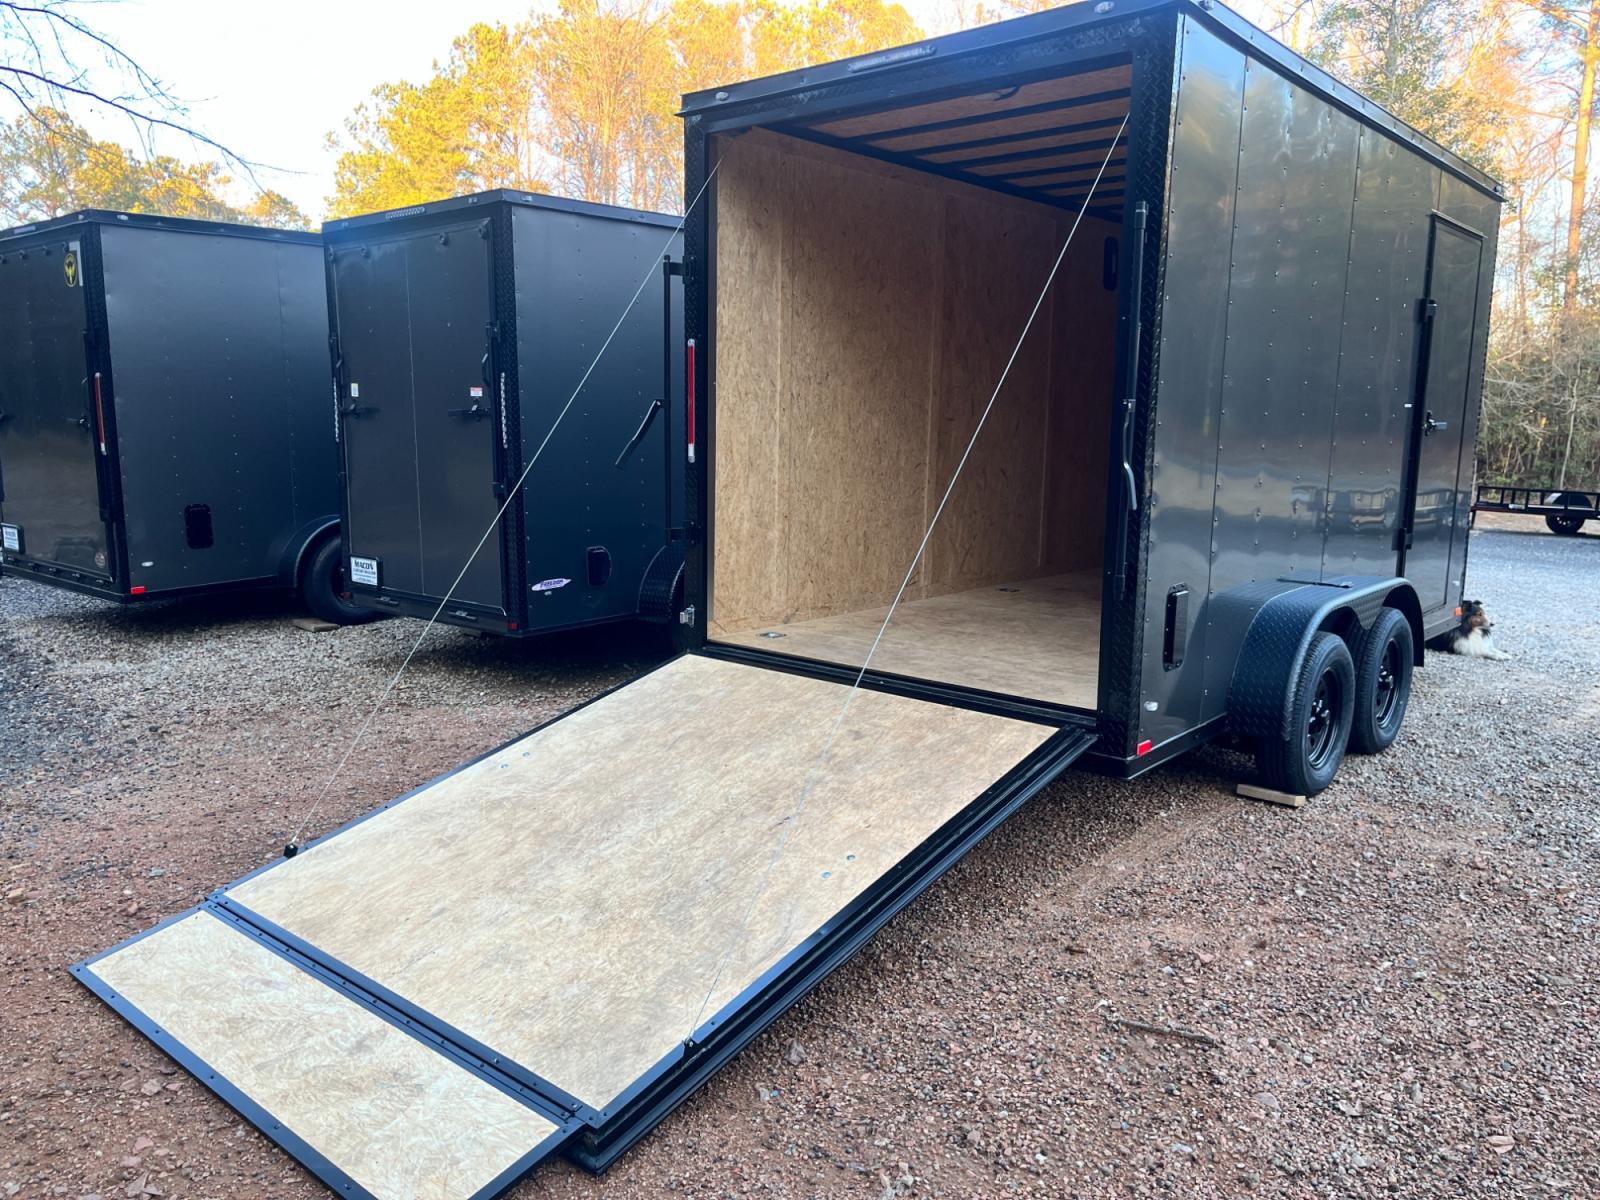 2023 .080 Charcoal Metallic w/Black Out Pkg. Elite Cargo 7ft X 14ft Tandem , located at 1330 Rainey Rd., Macon, 31220, (478) 960-1044, 32.845638, -83.778687 - Brand New 2023 "Top of the Line" Elite Cargo Brand Trailer Made in South Ga. Awesome 7ft X 14ft Tandem Enclosed Cycle Hauler & Cargo Trailer! Taller Inside Height is 7ft 6" Tall Inside & Ramp Door Clearance is 7ft! .080 Thick Metallic Charcoal Aluminum Skin is Awesome! Black Out Pkg Trim, Wider - Photo #9